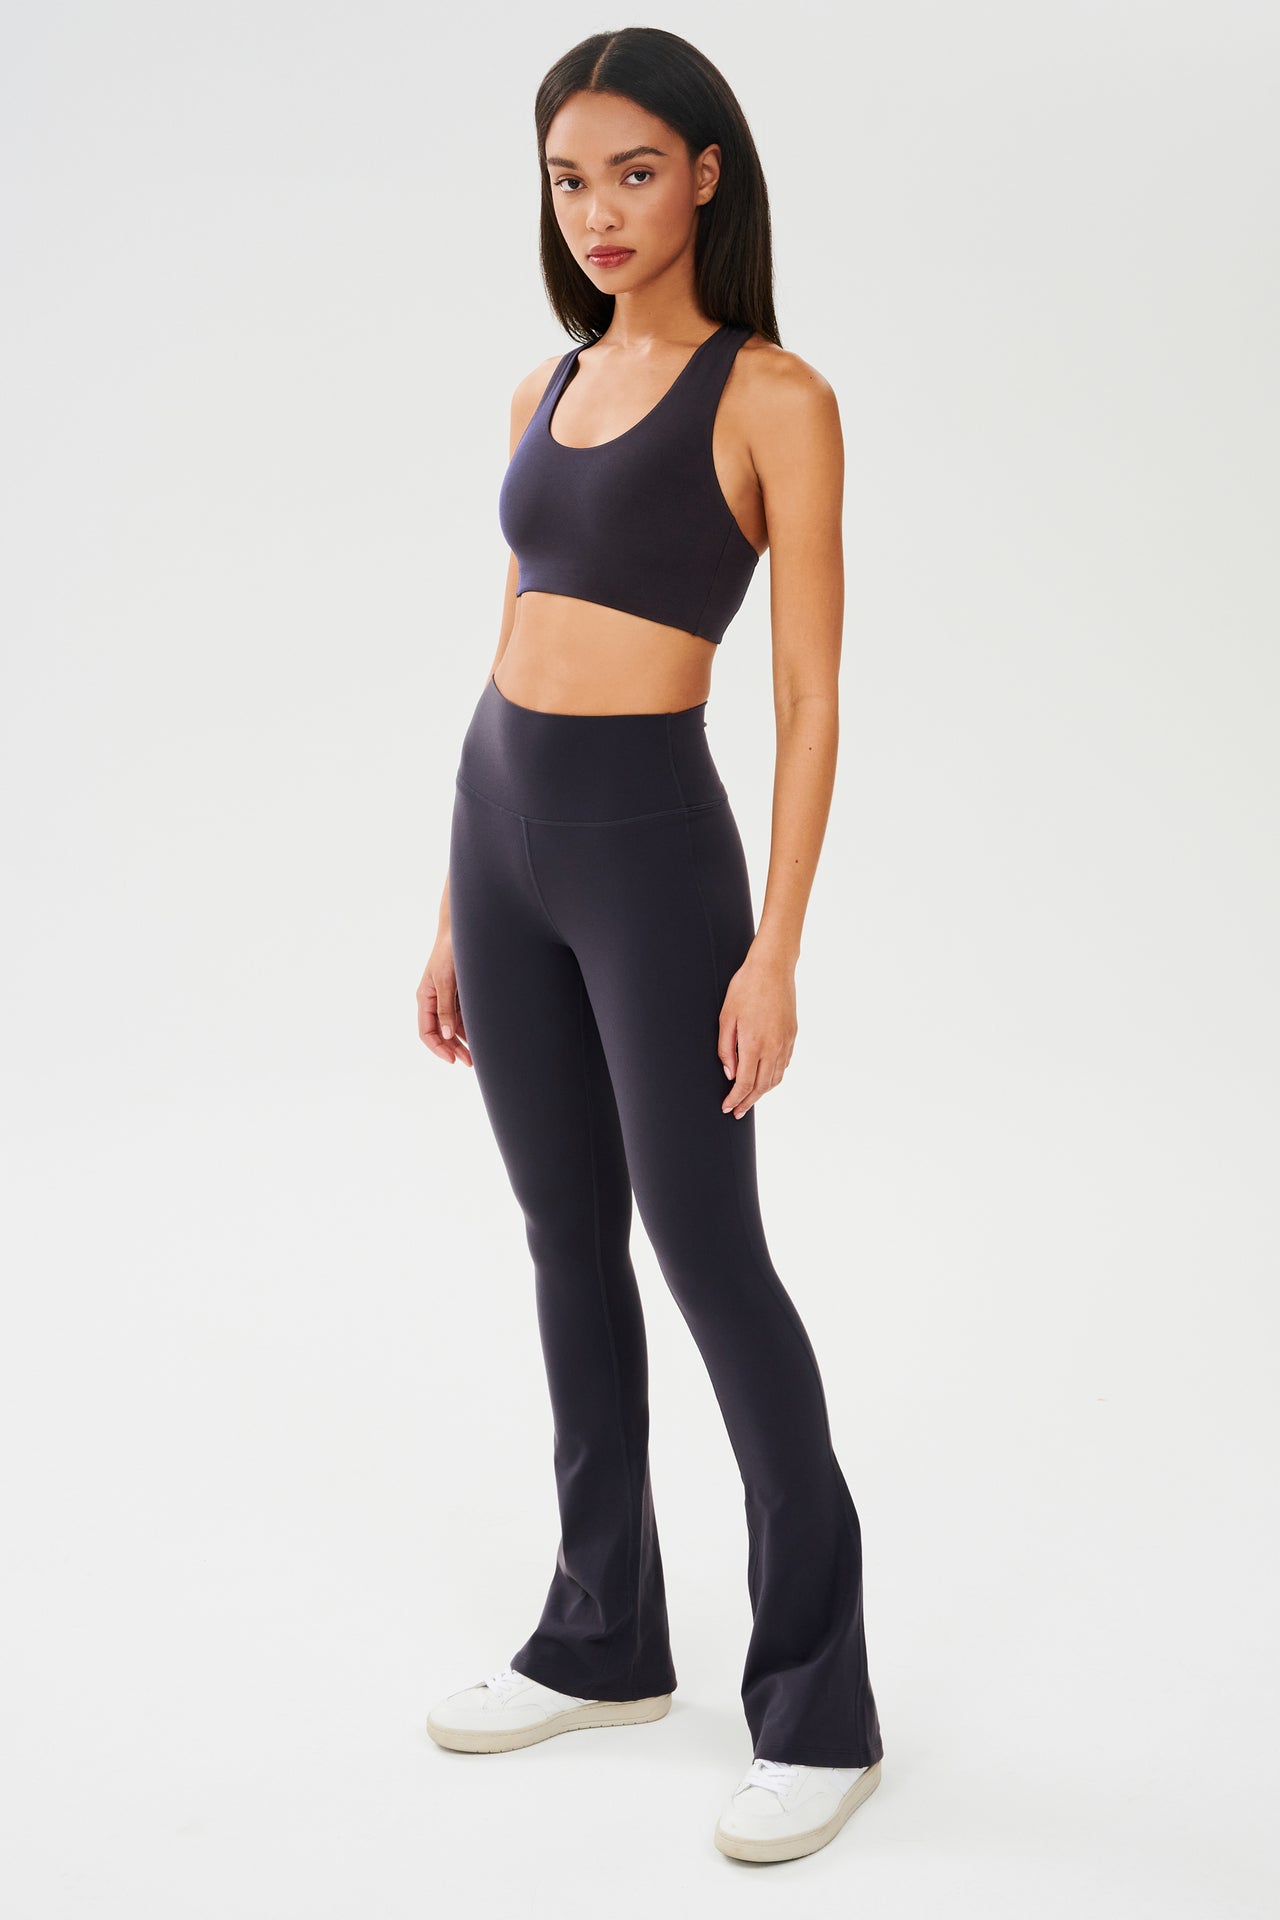 Full front side view of woman with straight dark hair wearing dark gray with dark blue tone bra and dark gray with dark blue tone leggings paired with white shoes